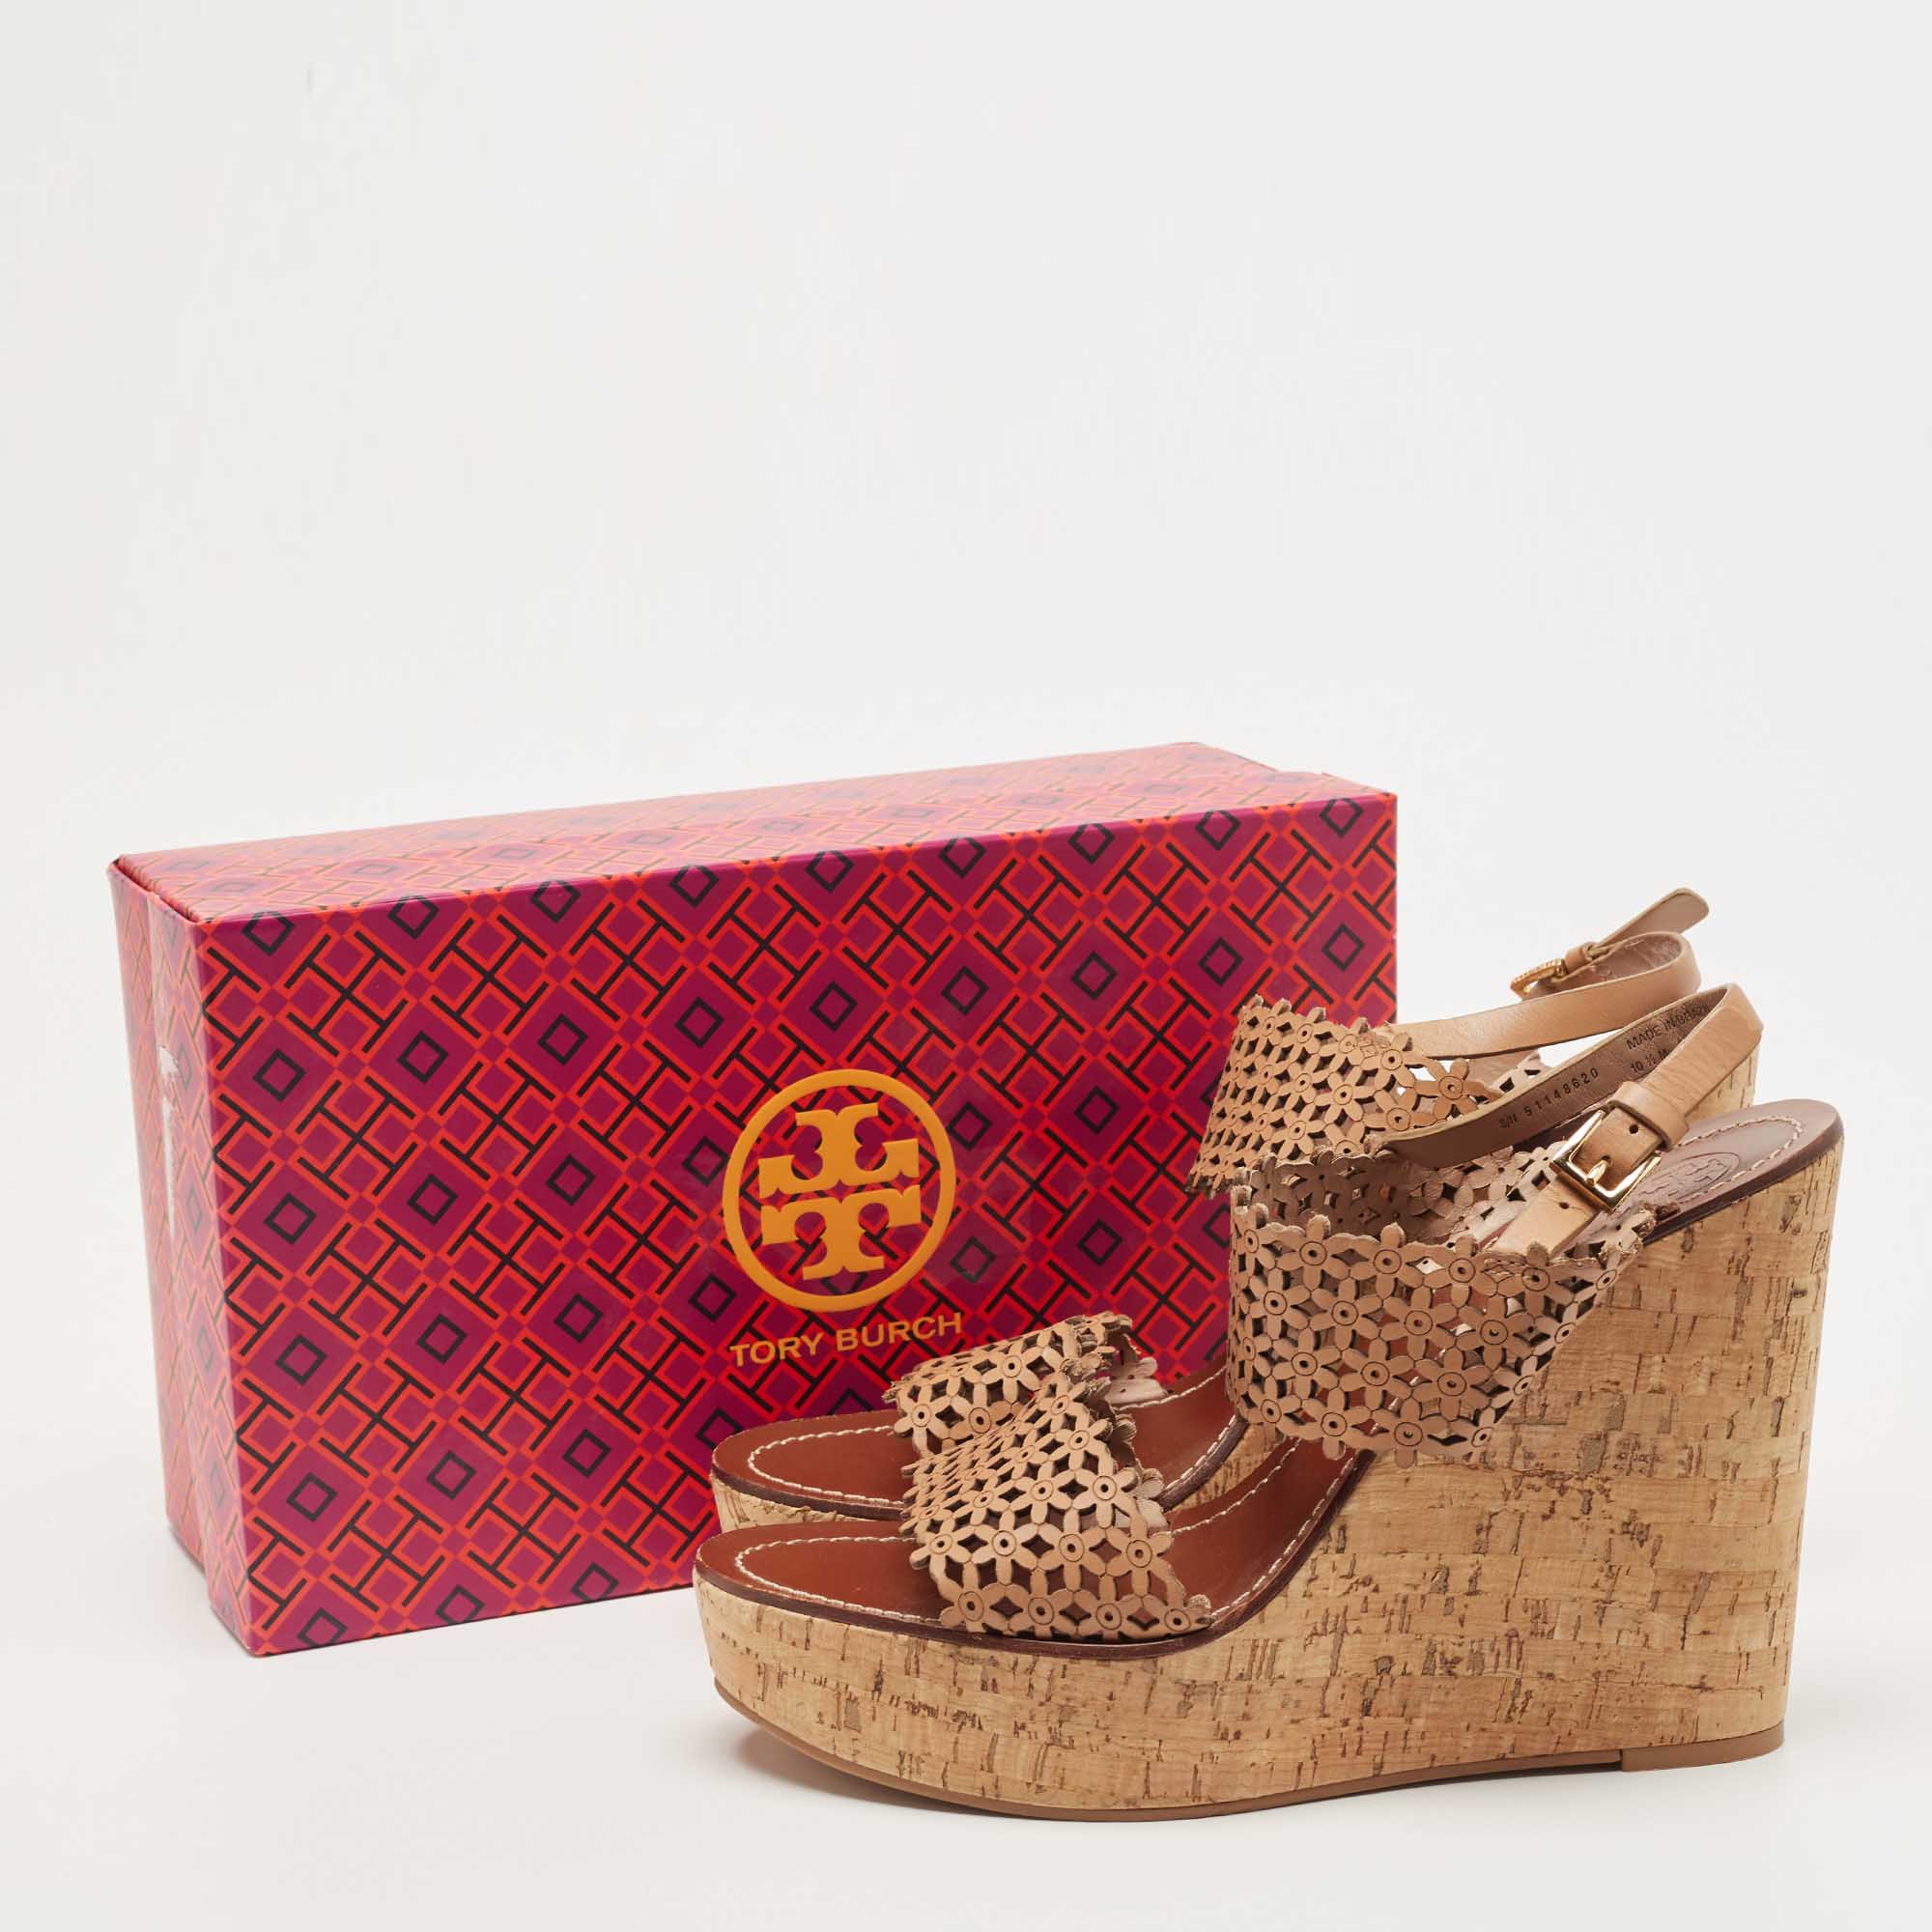 Tory Burch Brown Leather Daisy Wedge Sandals Size 40.5